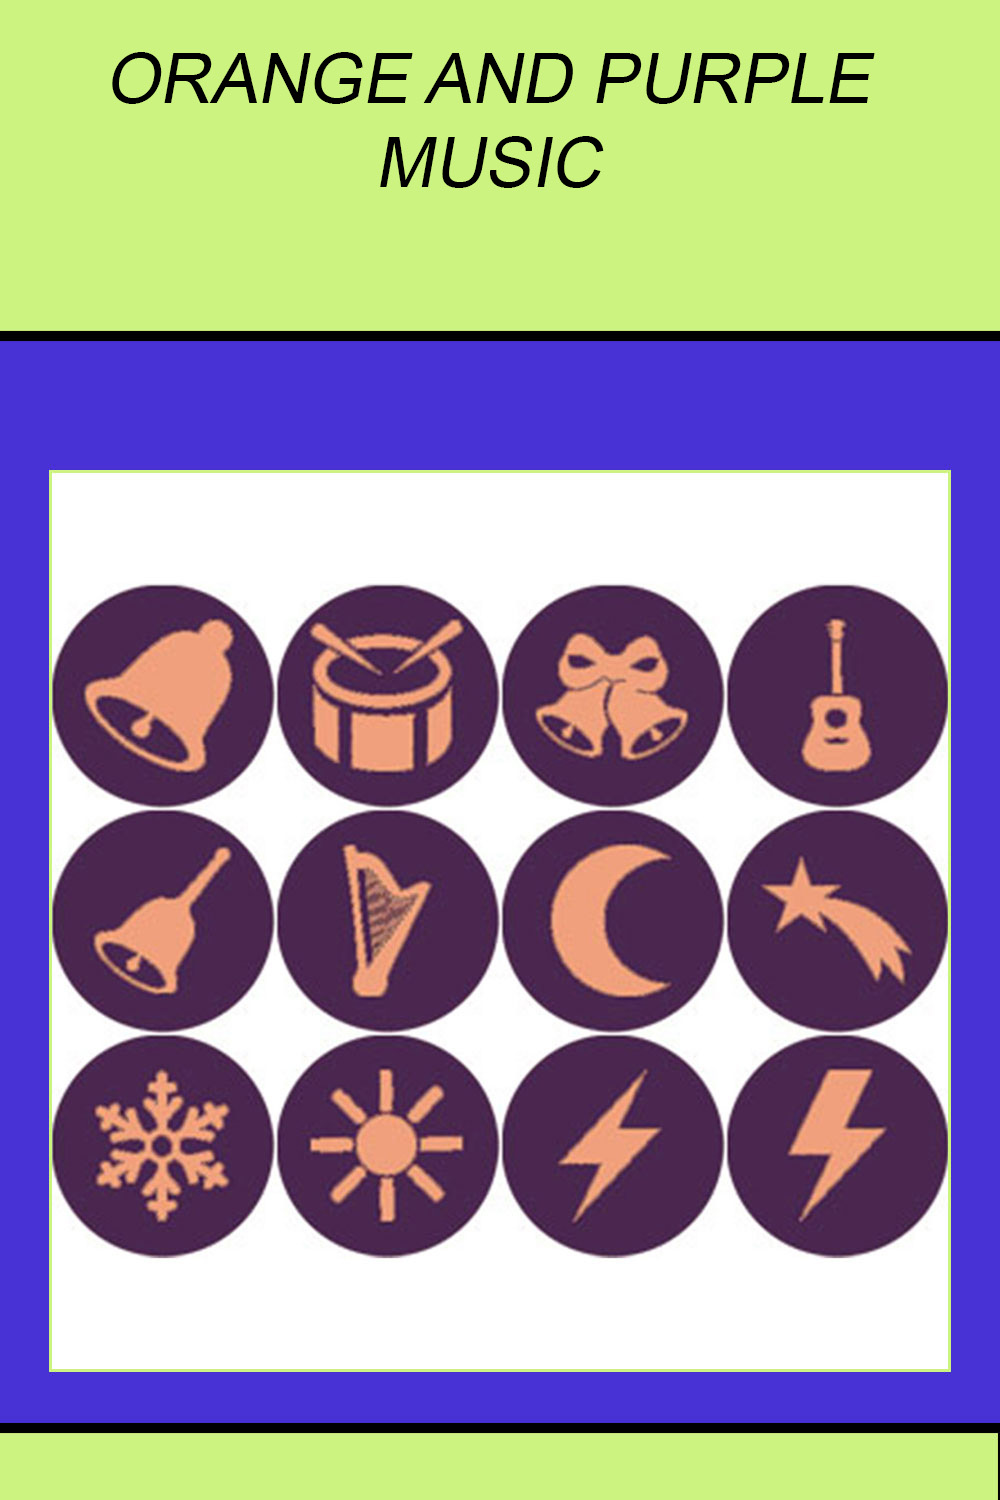 ORANGE AND PURPLE MUSIC ROUND ICONS pinterest preview image.